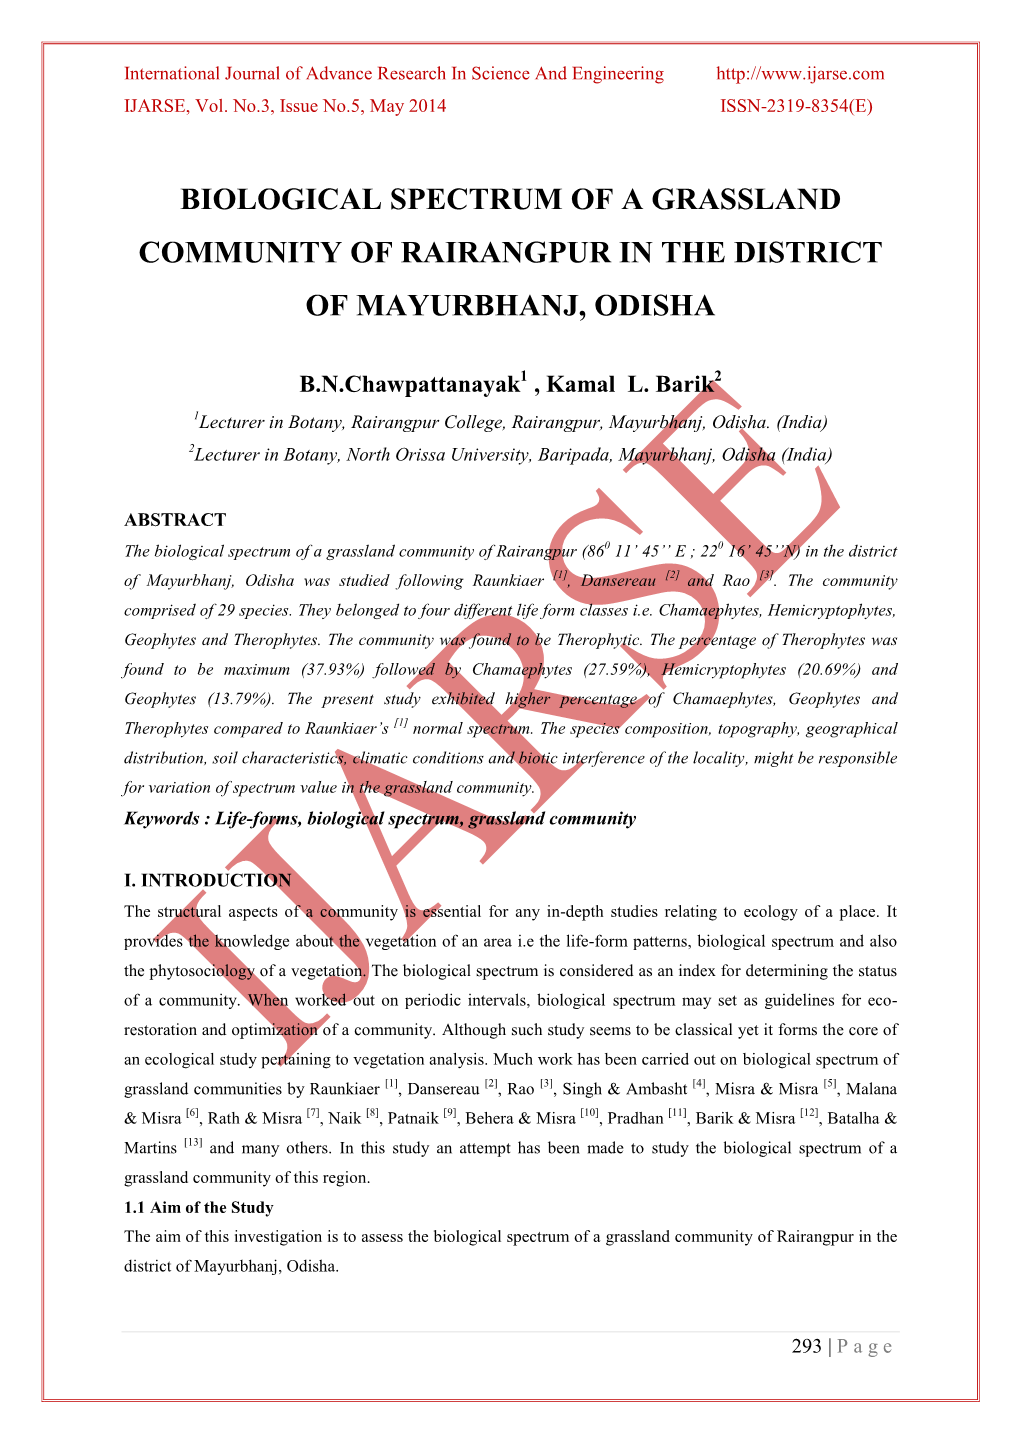 Floristic Composition of a Grassland Community of Rairangpur in The